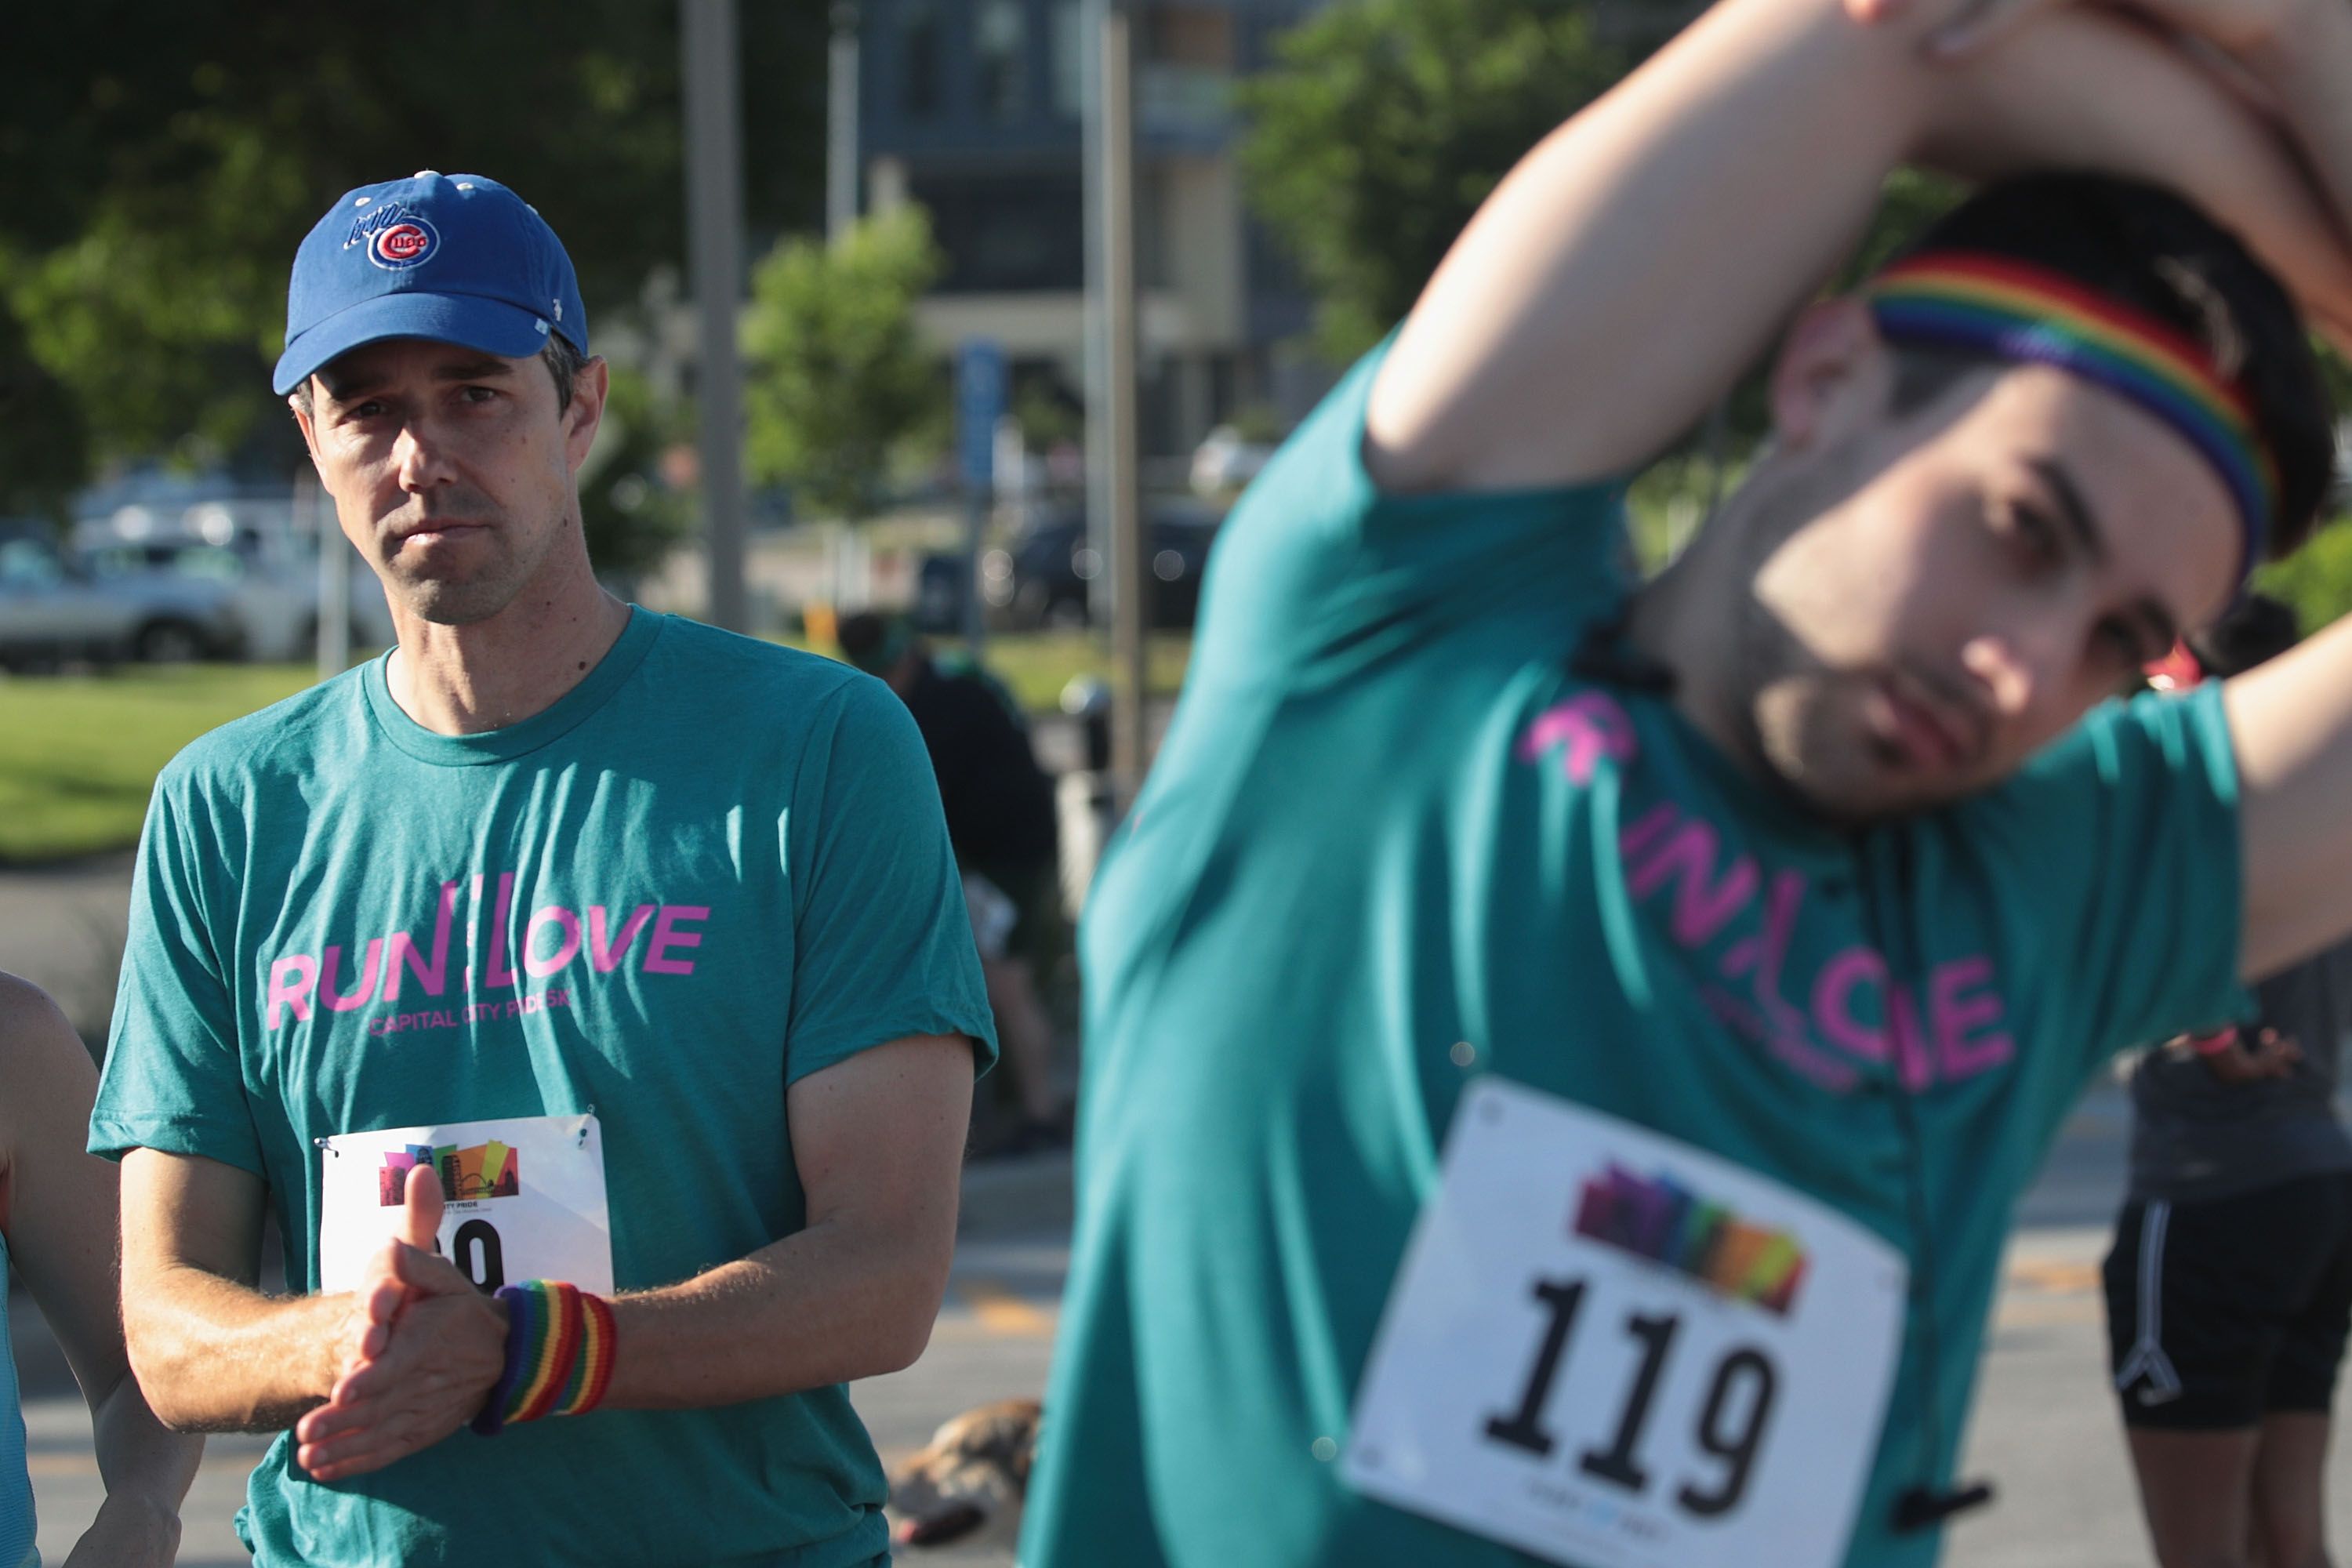  Democratic presidential candidate and former Texas congressman Beto O'Rourke (L) stretches before participating in the Pride Fest Fun Run 5K on June 08, 2019 in Des Moines, Iowa. 